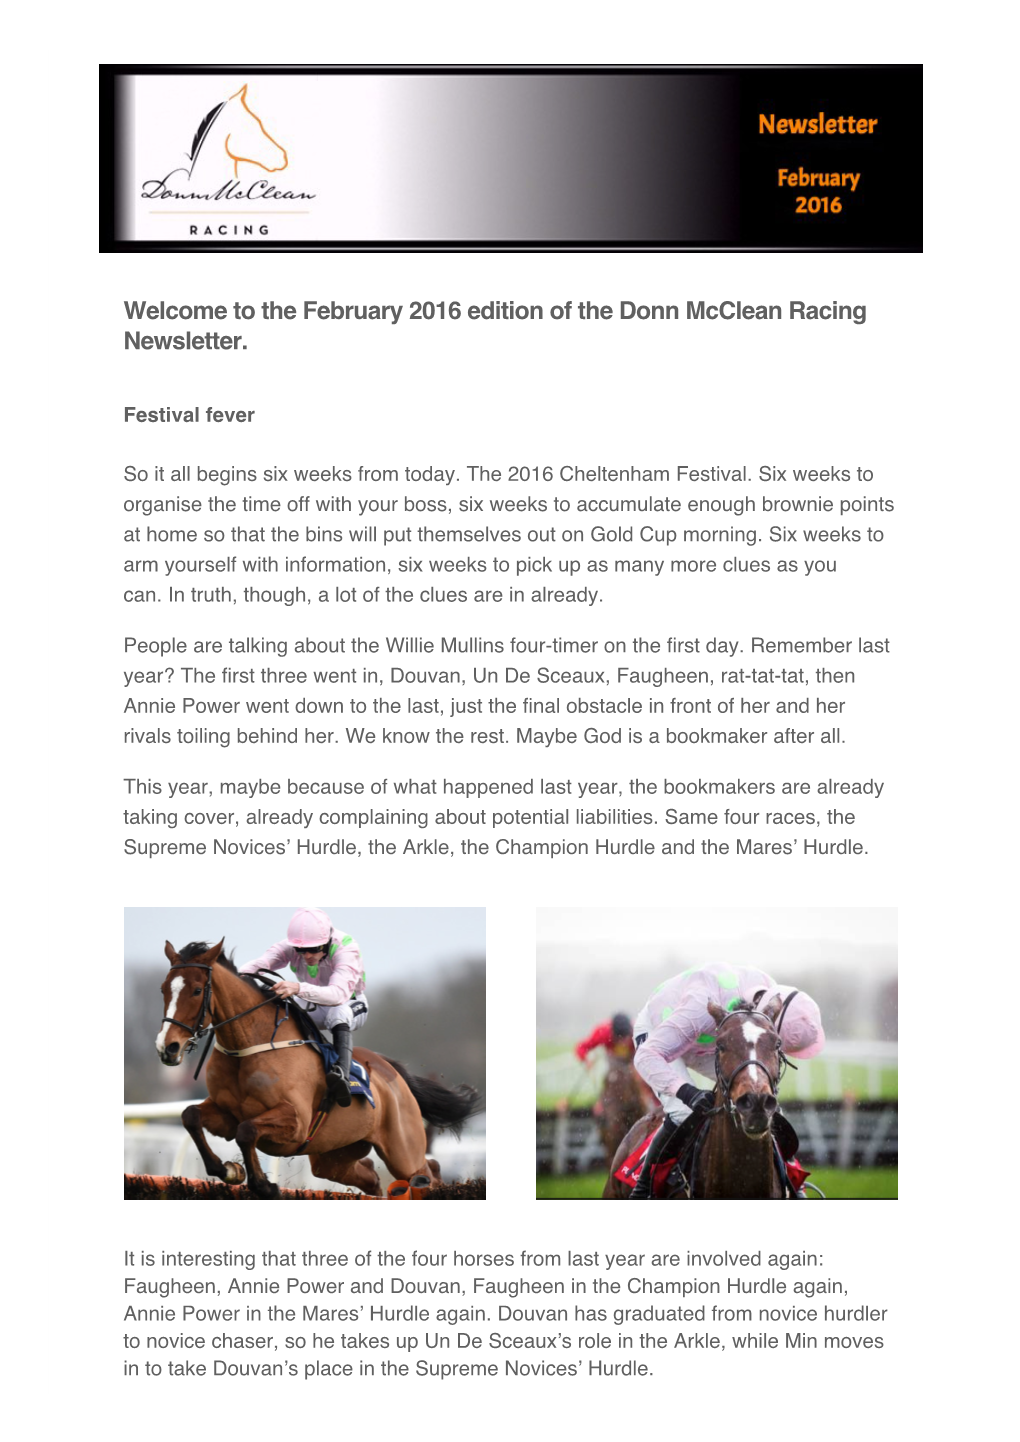 Welcome to the February 2016 Edition of the Donn Mcclean Racing Newsletter